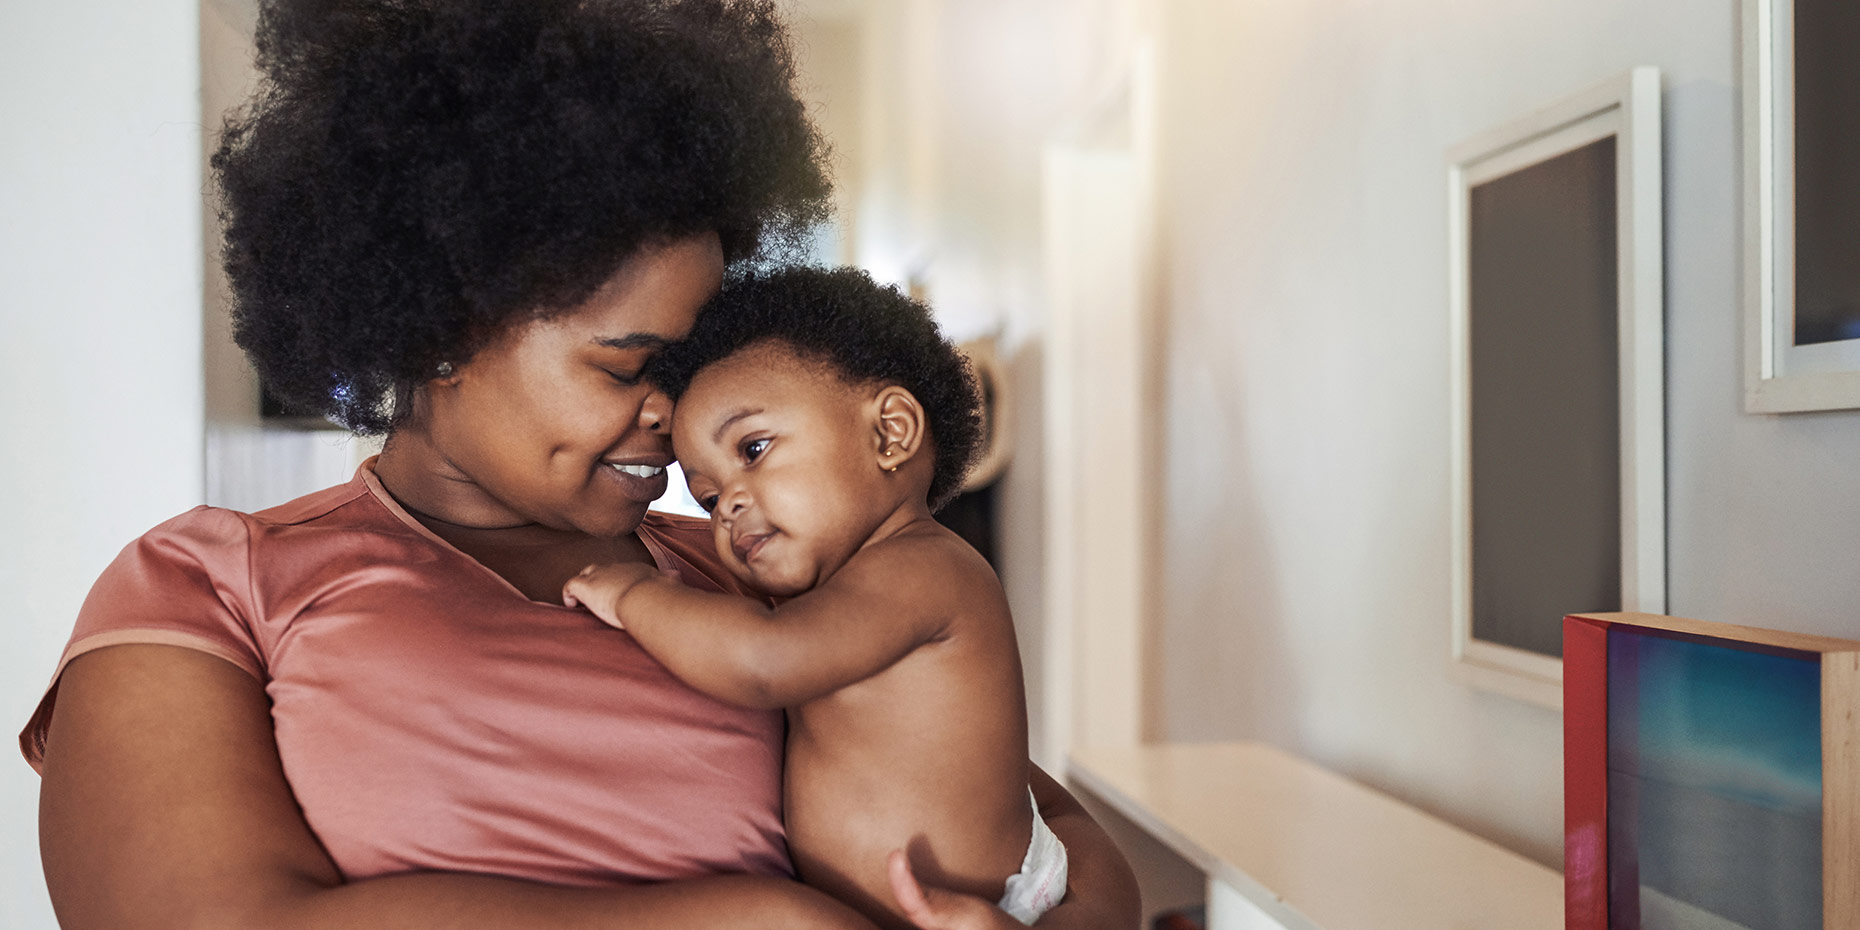 Black mom smiling nuzzling holding sweet baby resting head on mom